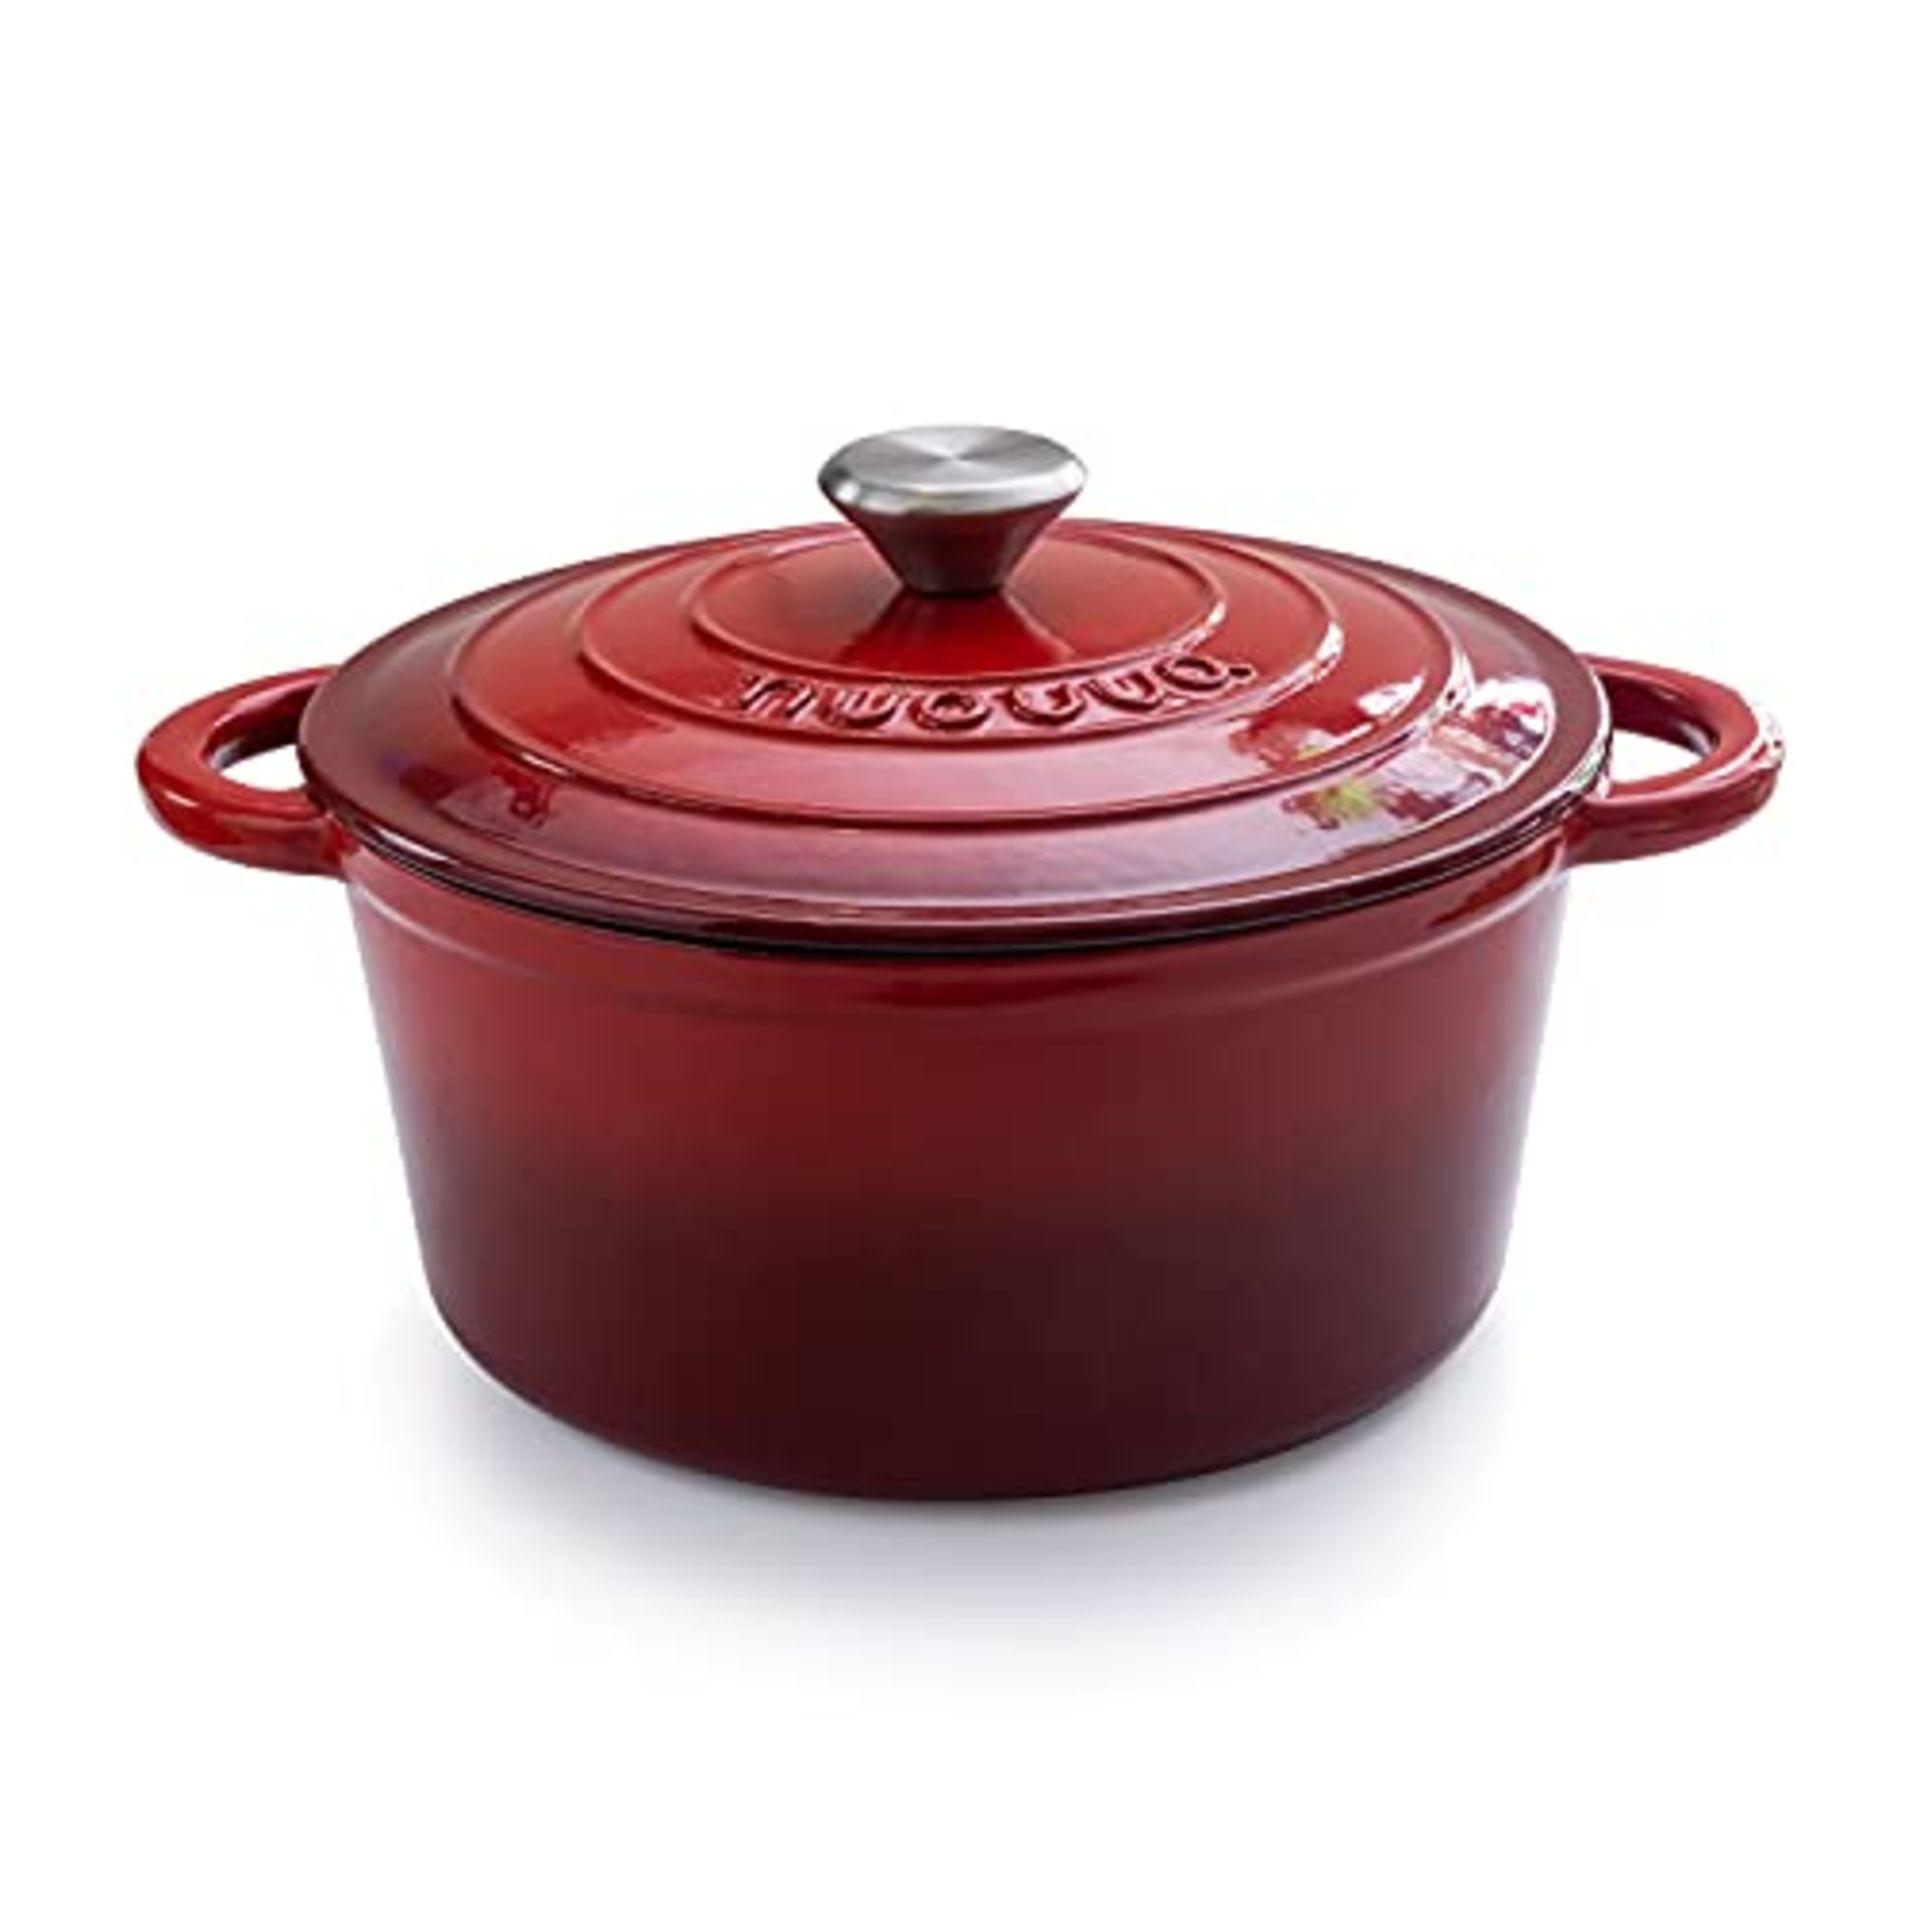 RRP £44.65 Cast Iron Pot with Lid Non-Stick Ovenproof Enamelled